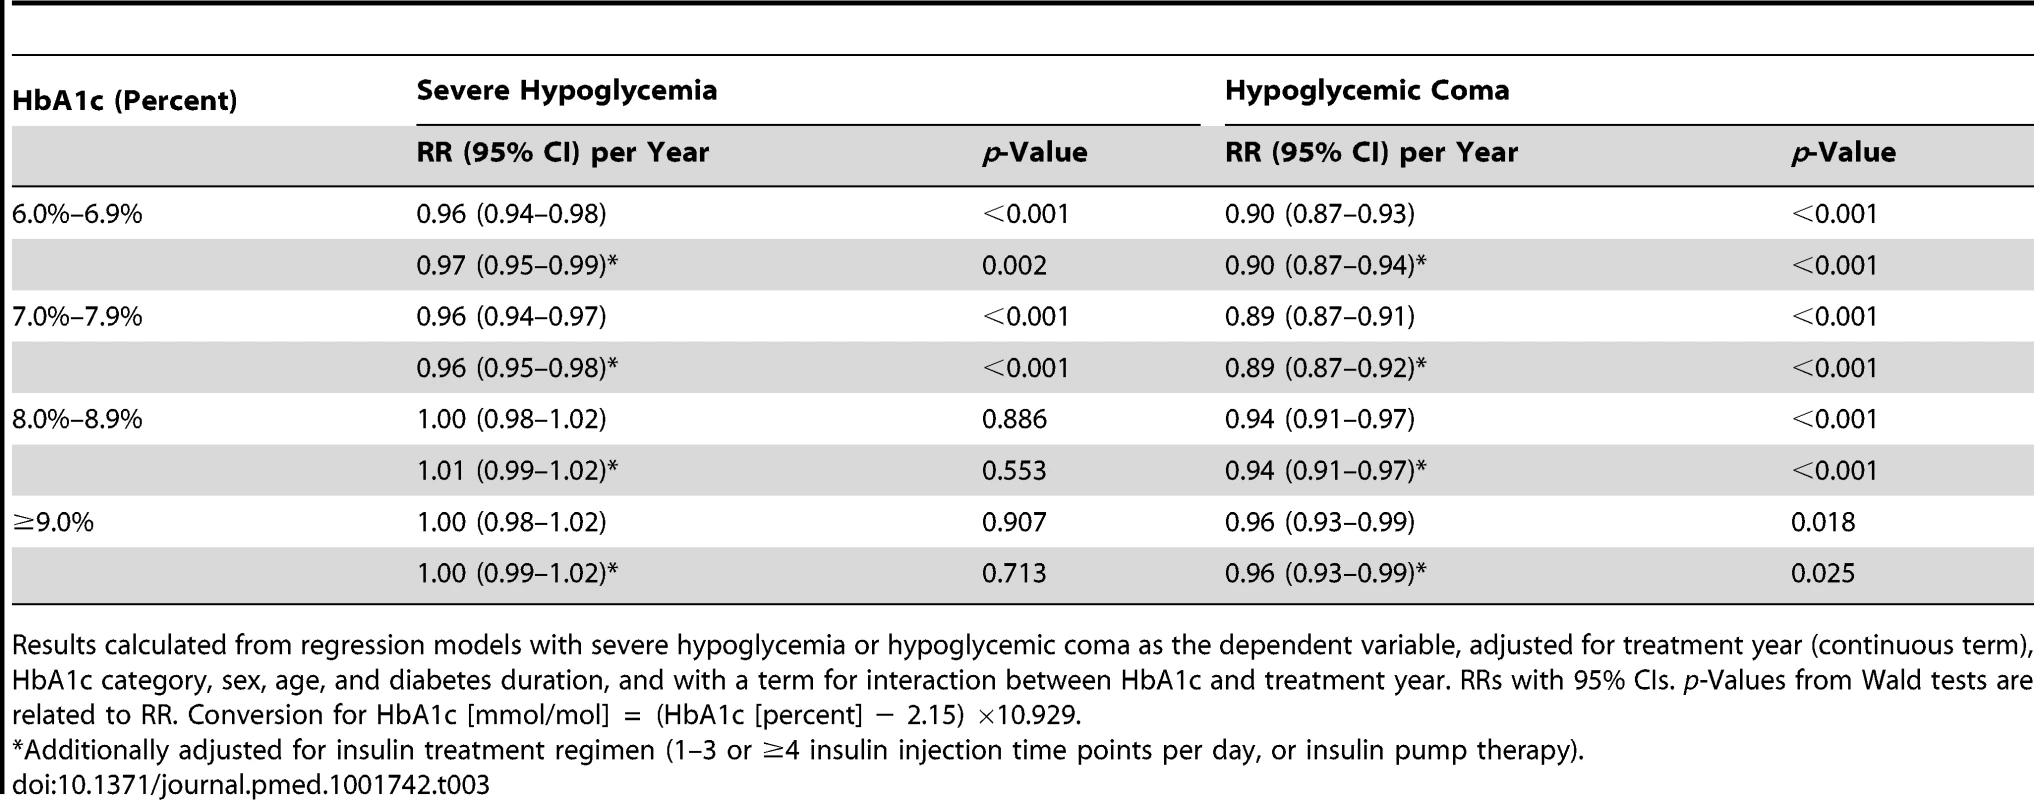 Relative risk for severe hypoglycemia and hypoglycemic coma per year from 1995 to 2012 by HbA1c category.